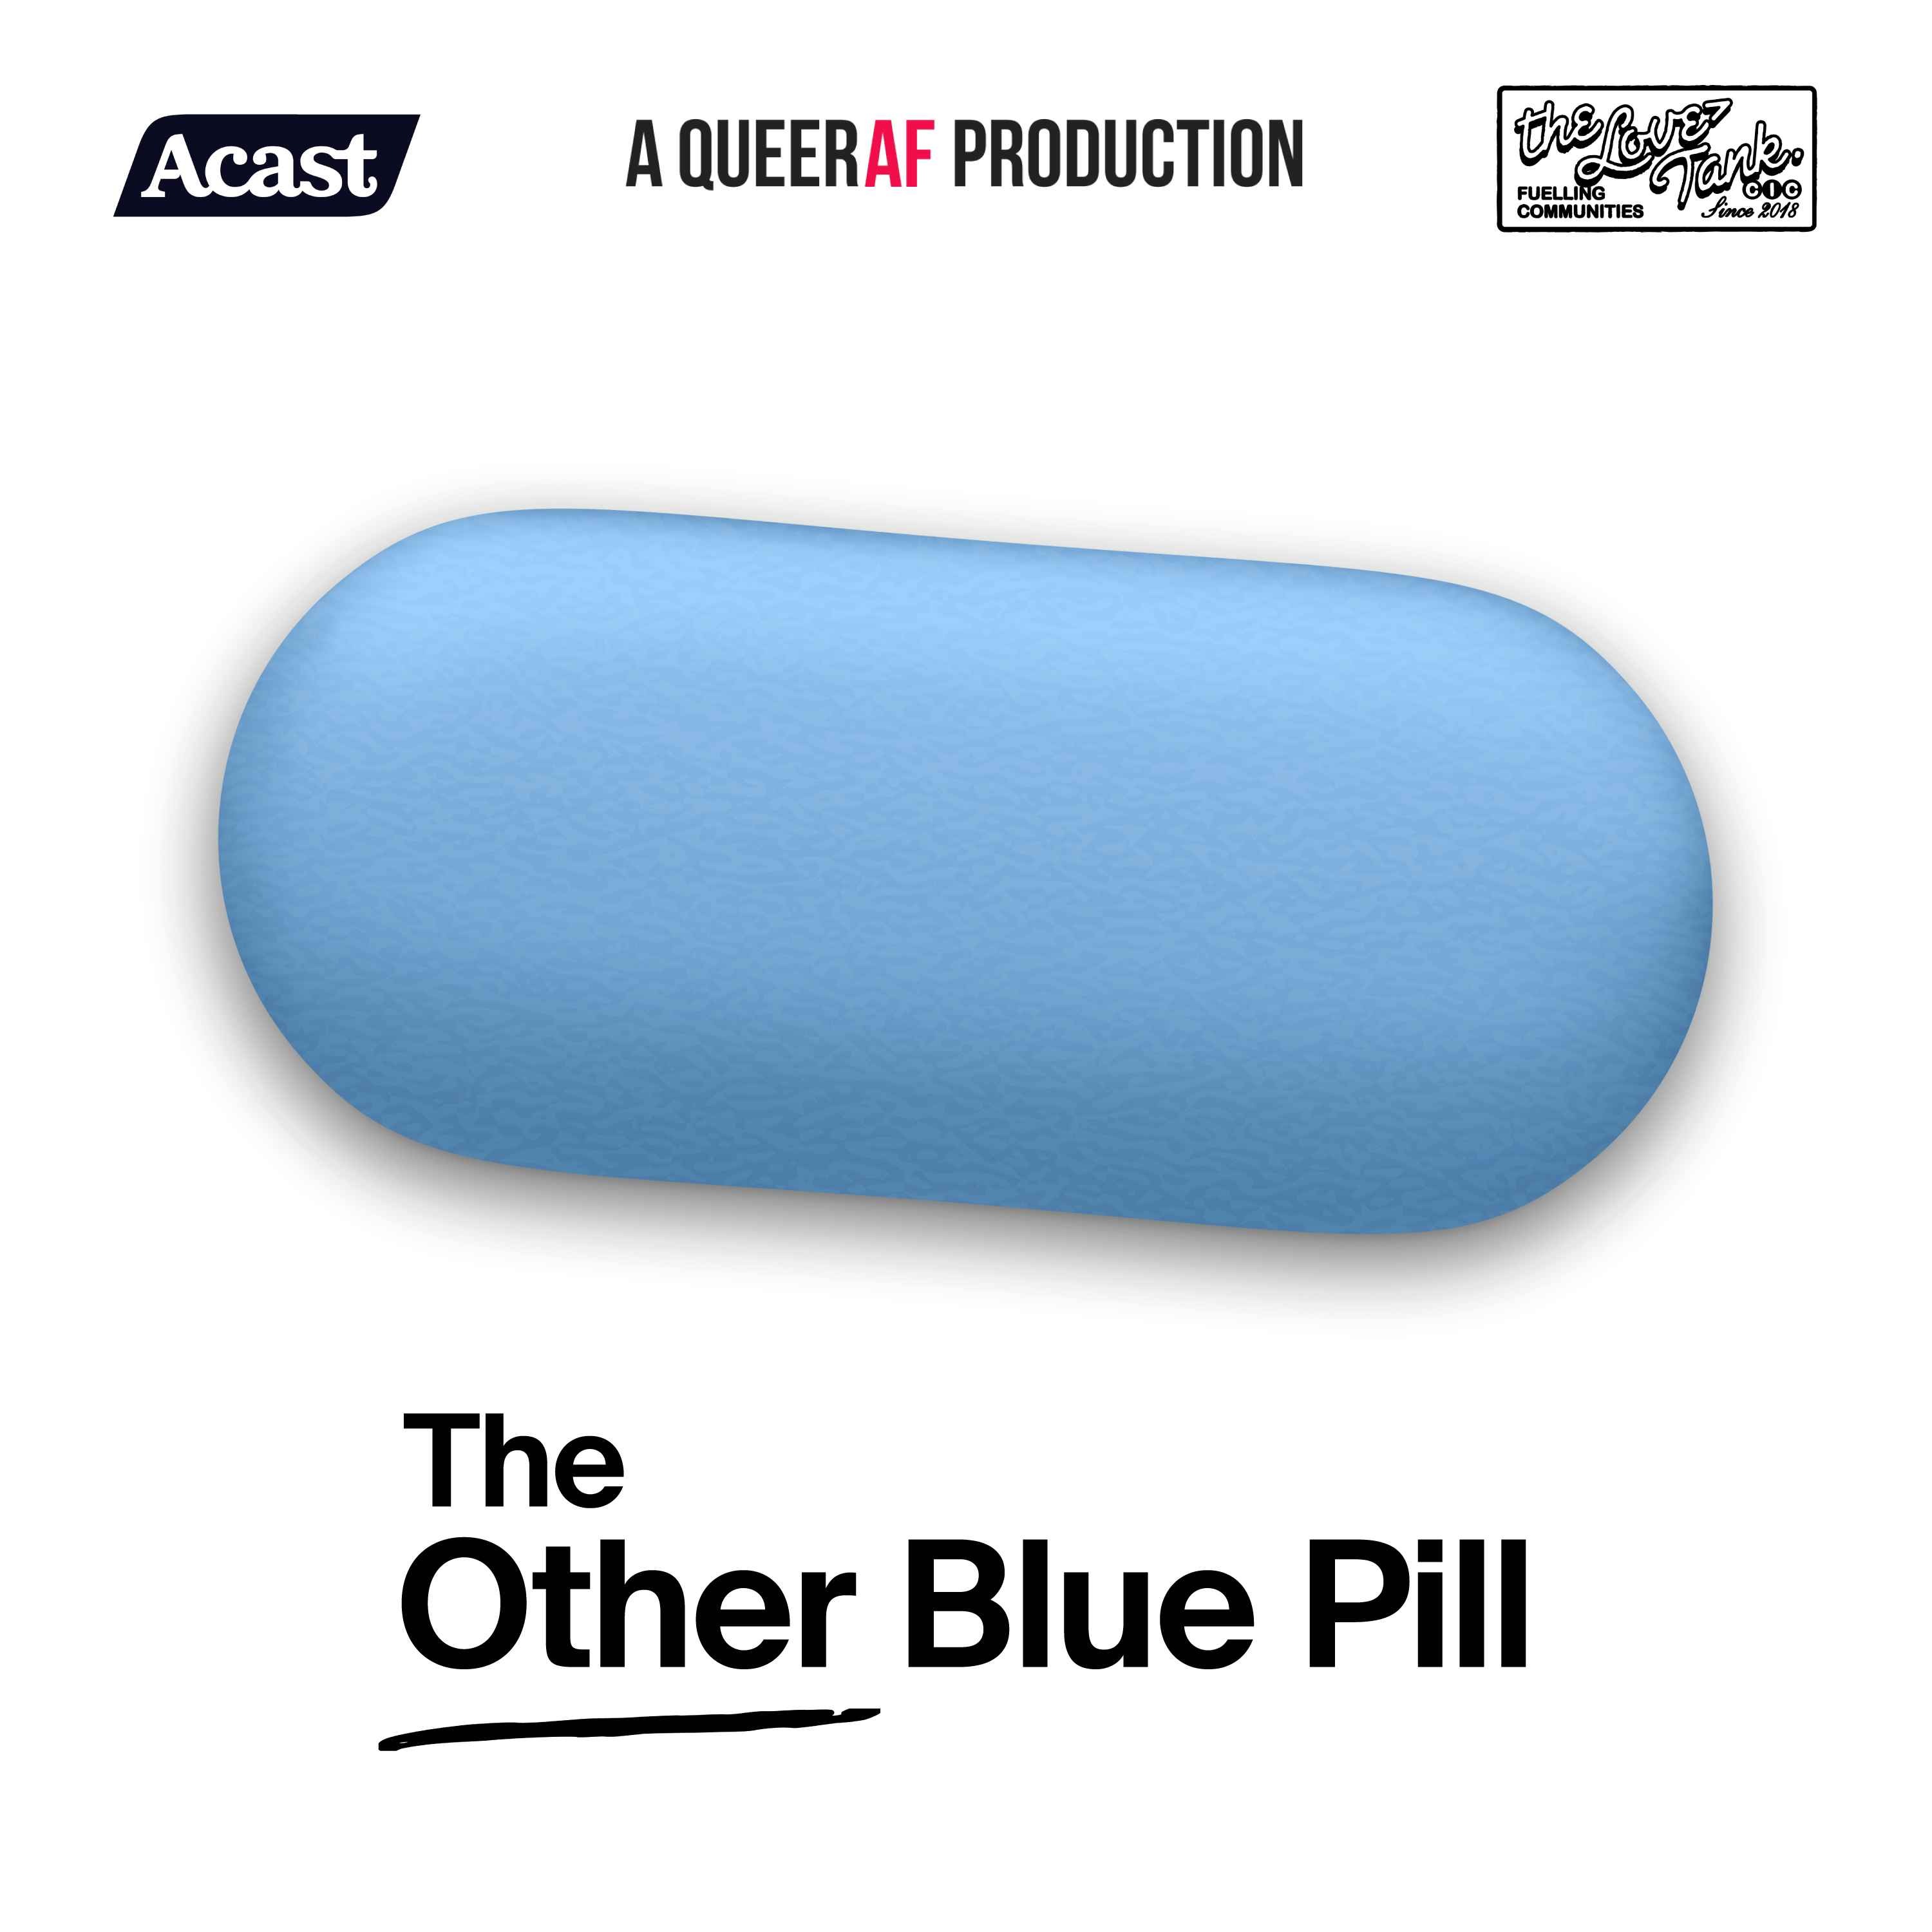 Trailer: The Other Blue Pill